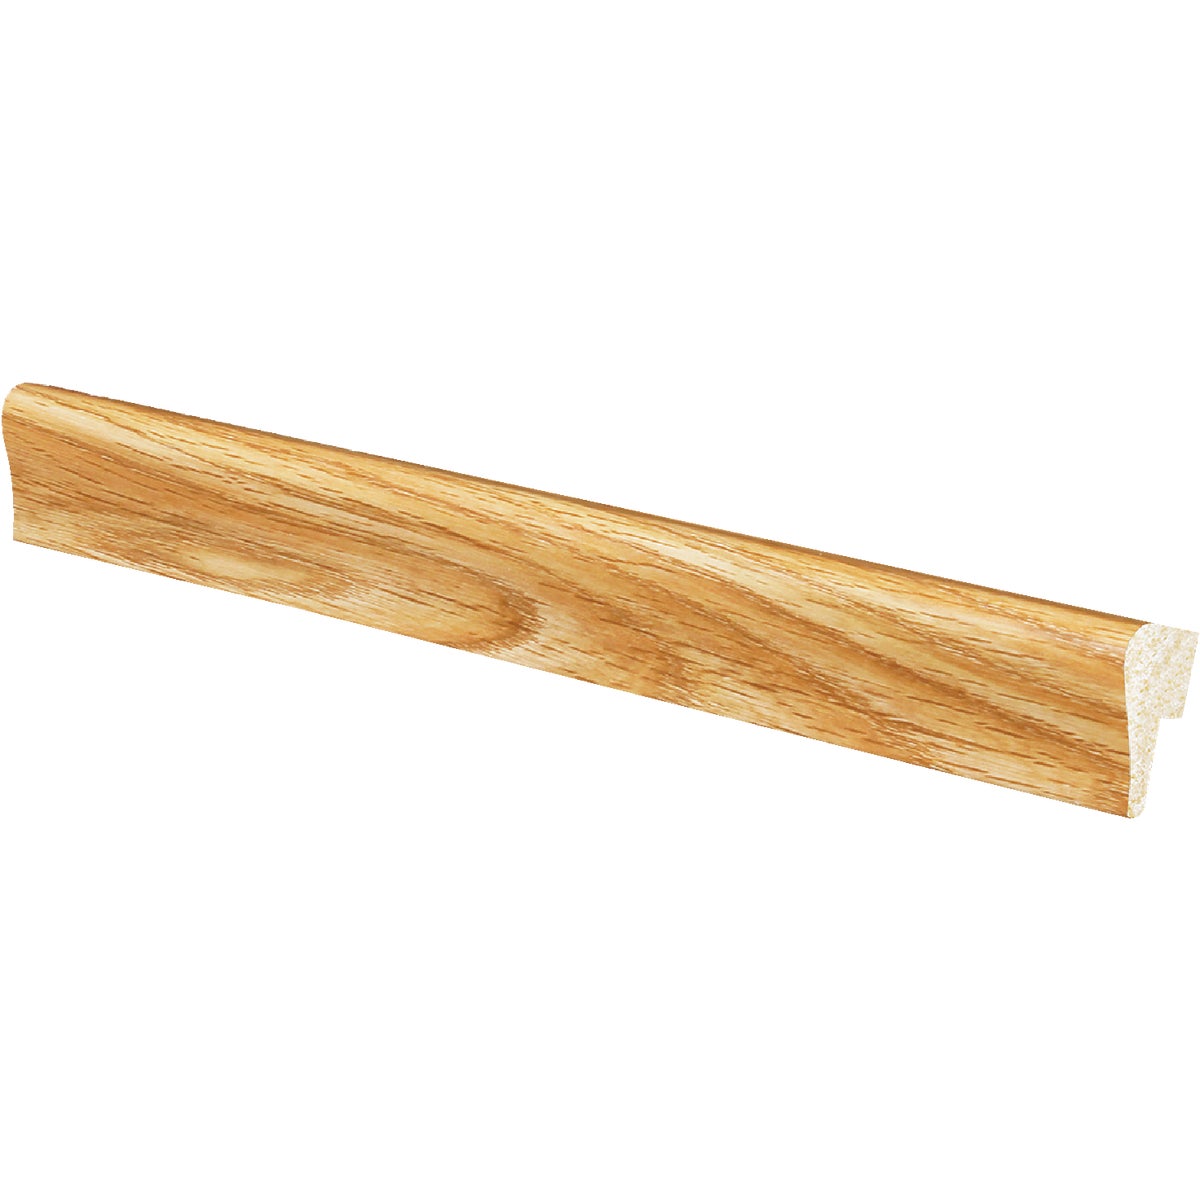 Inteplast Building Products 5/16 In. W. x 1-1/8 In. H. x 8 Ft. L Majestic Oak Polystyrene Cap Molding